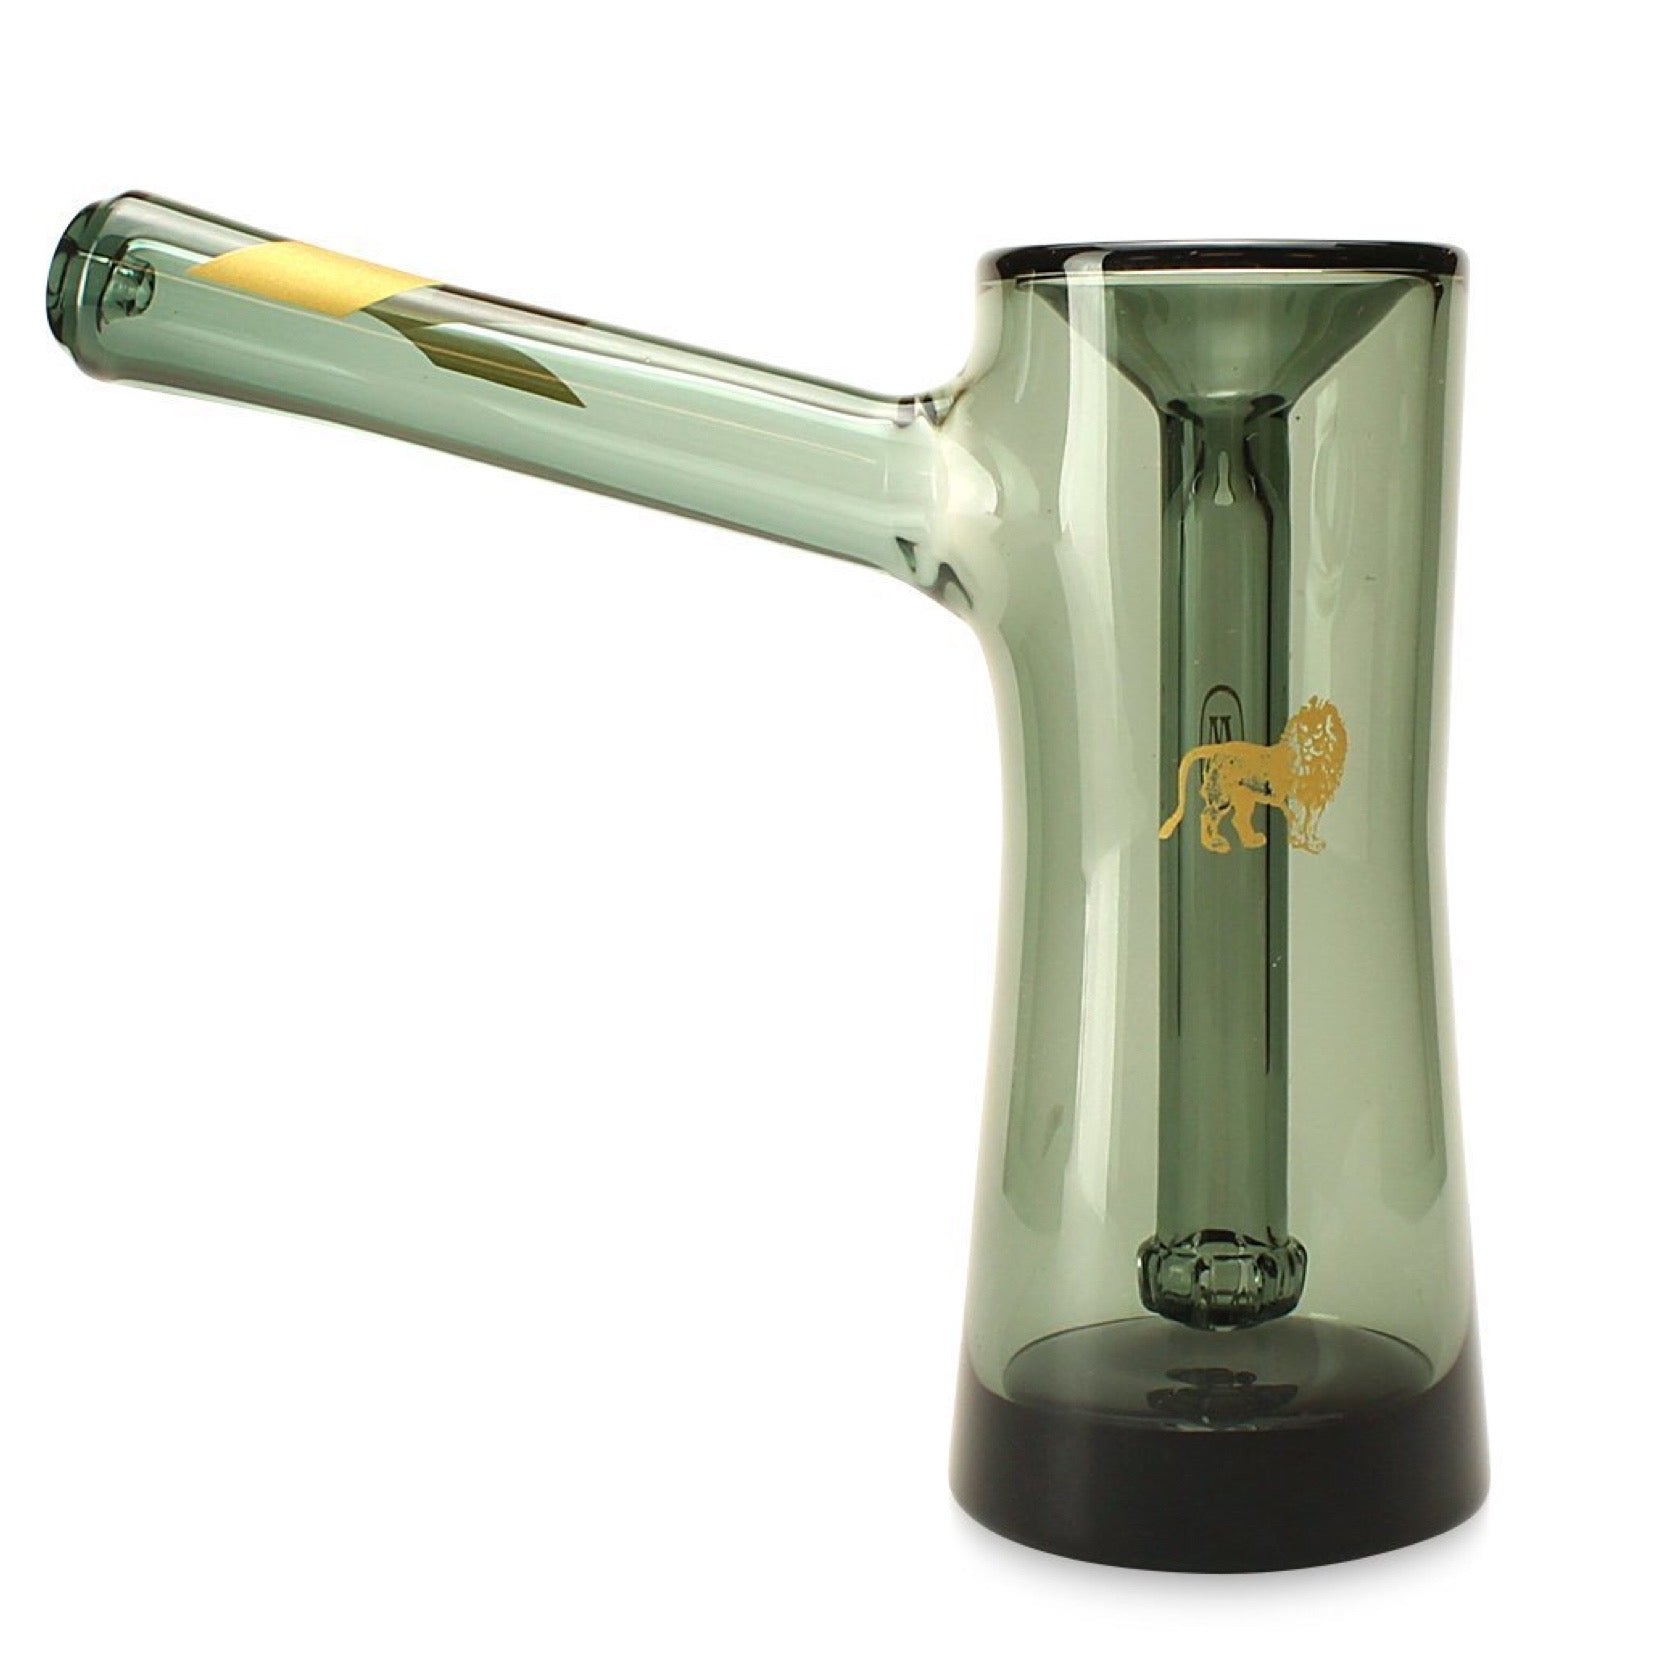 Marley Natural Smoked Glass Bubbler by Marley Natural | Mission Dispensary